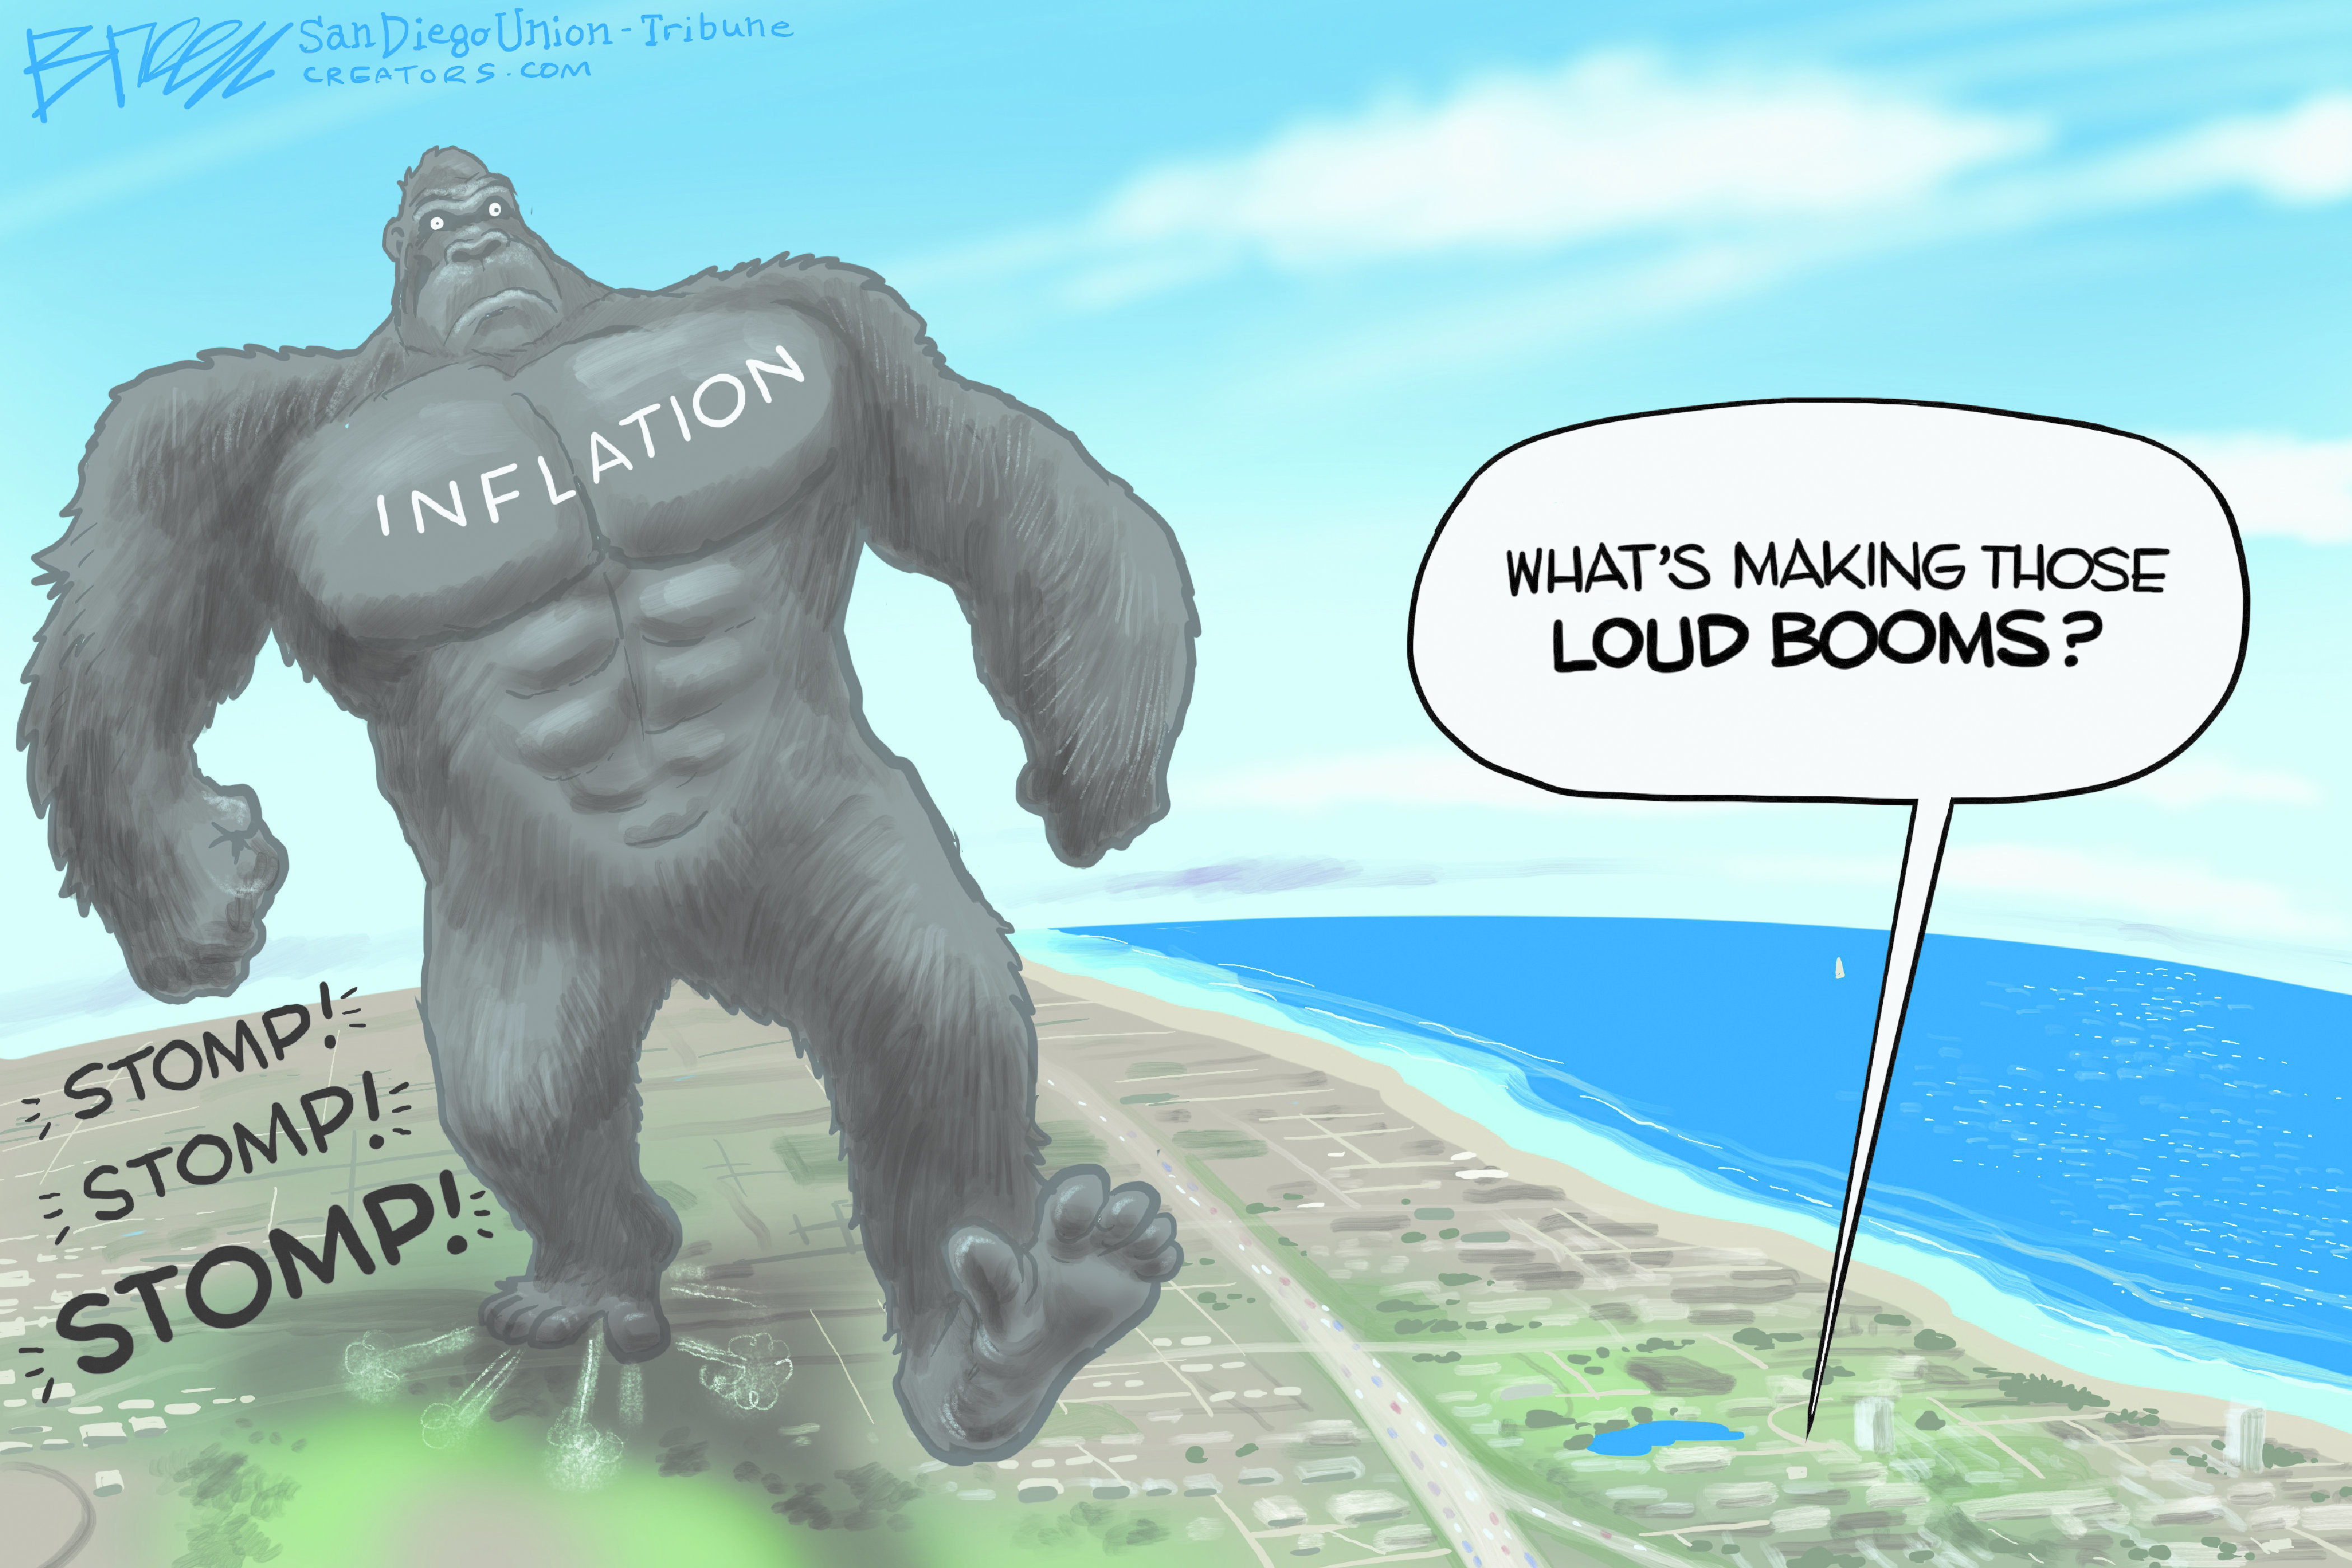 The inflation monster